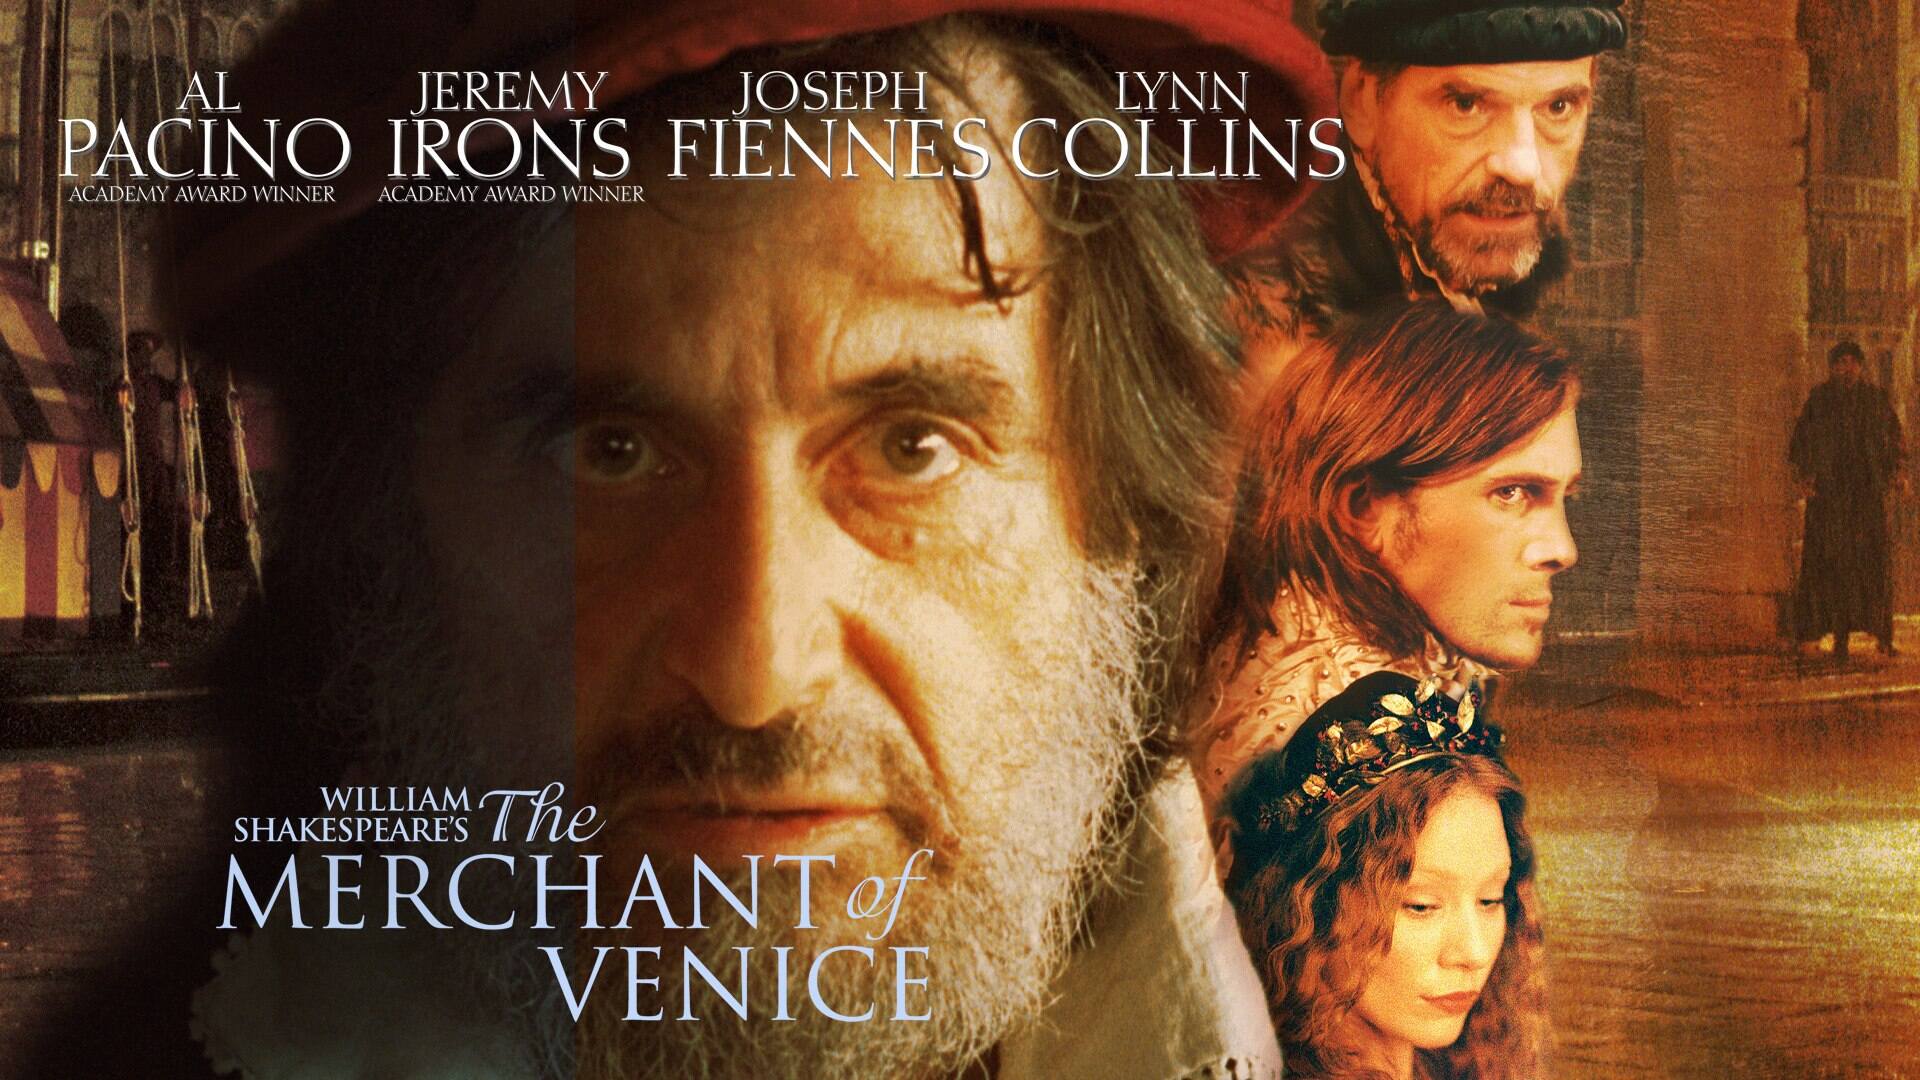 44-facts-about-the-movie-the-merchant-of-venice